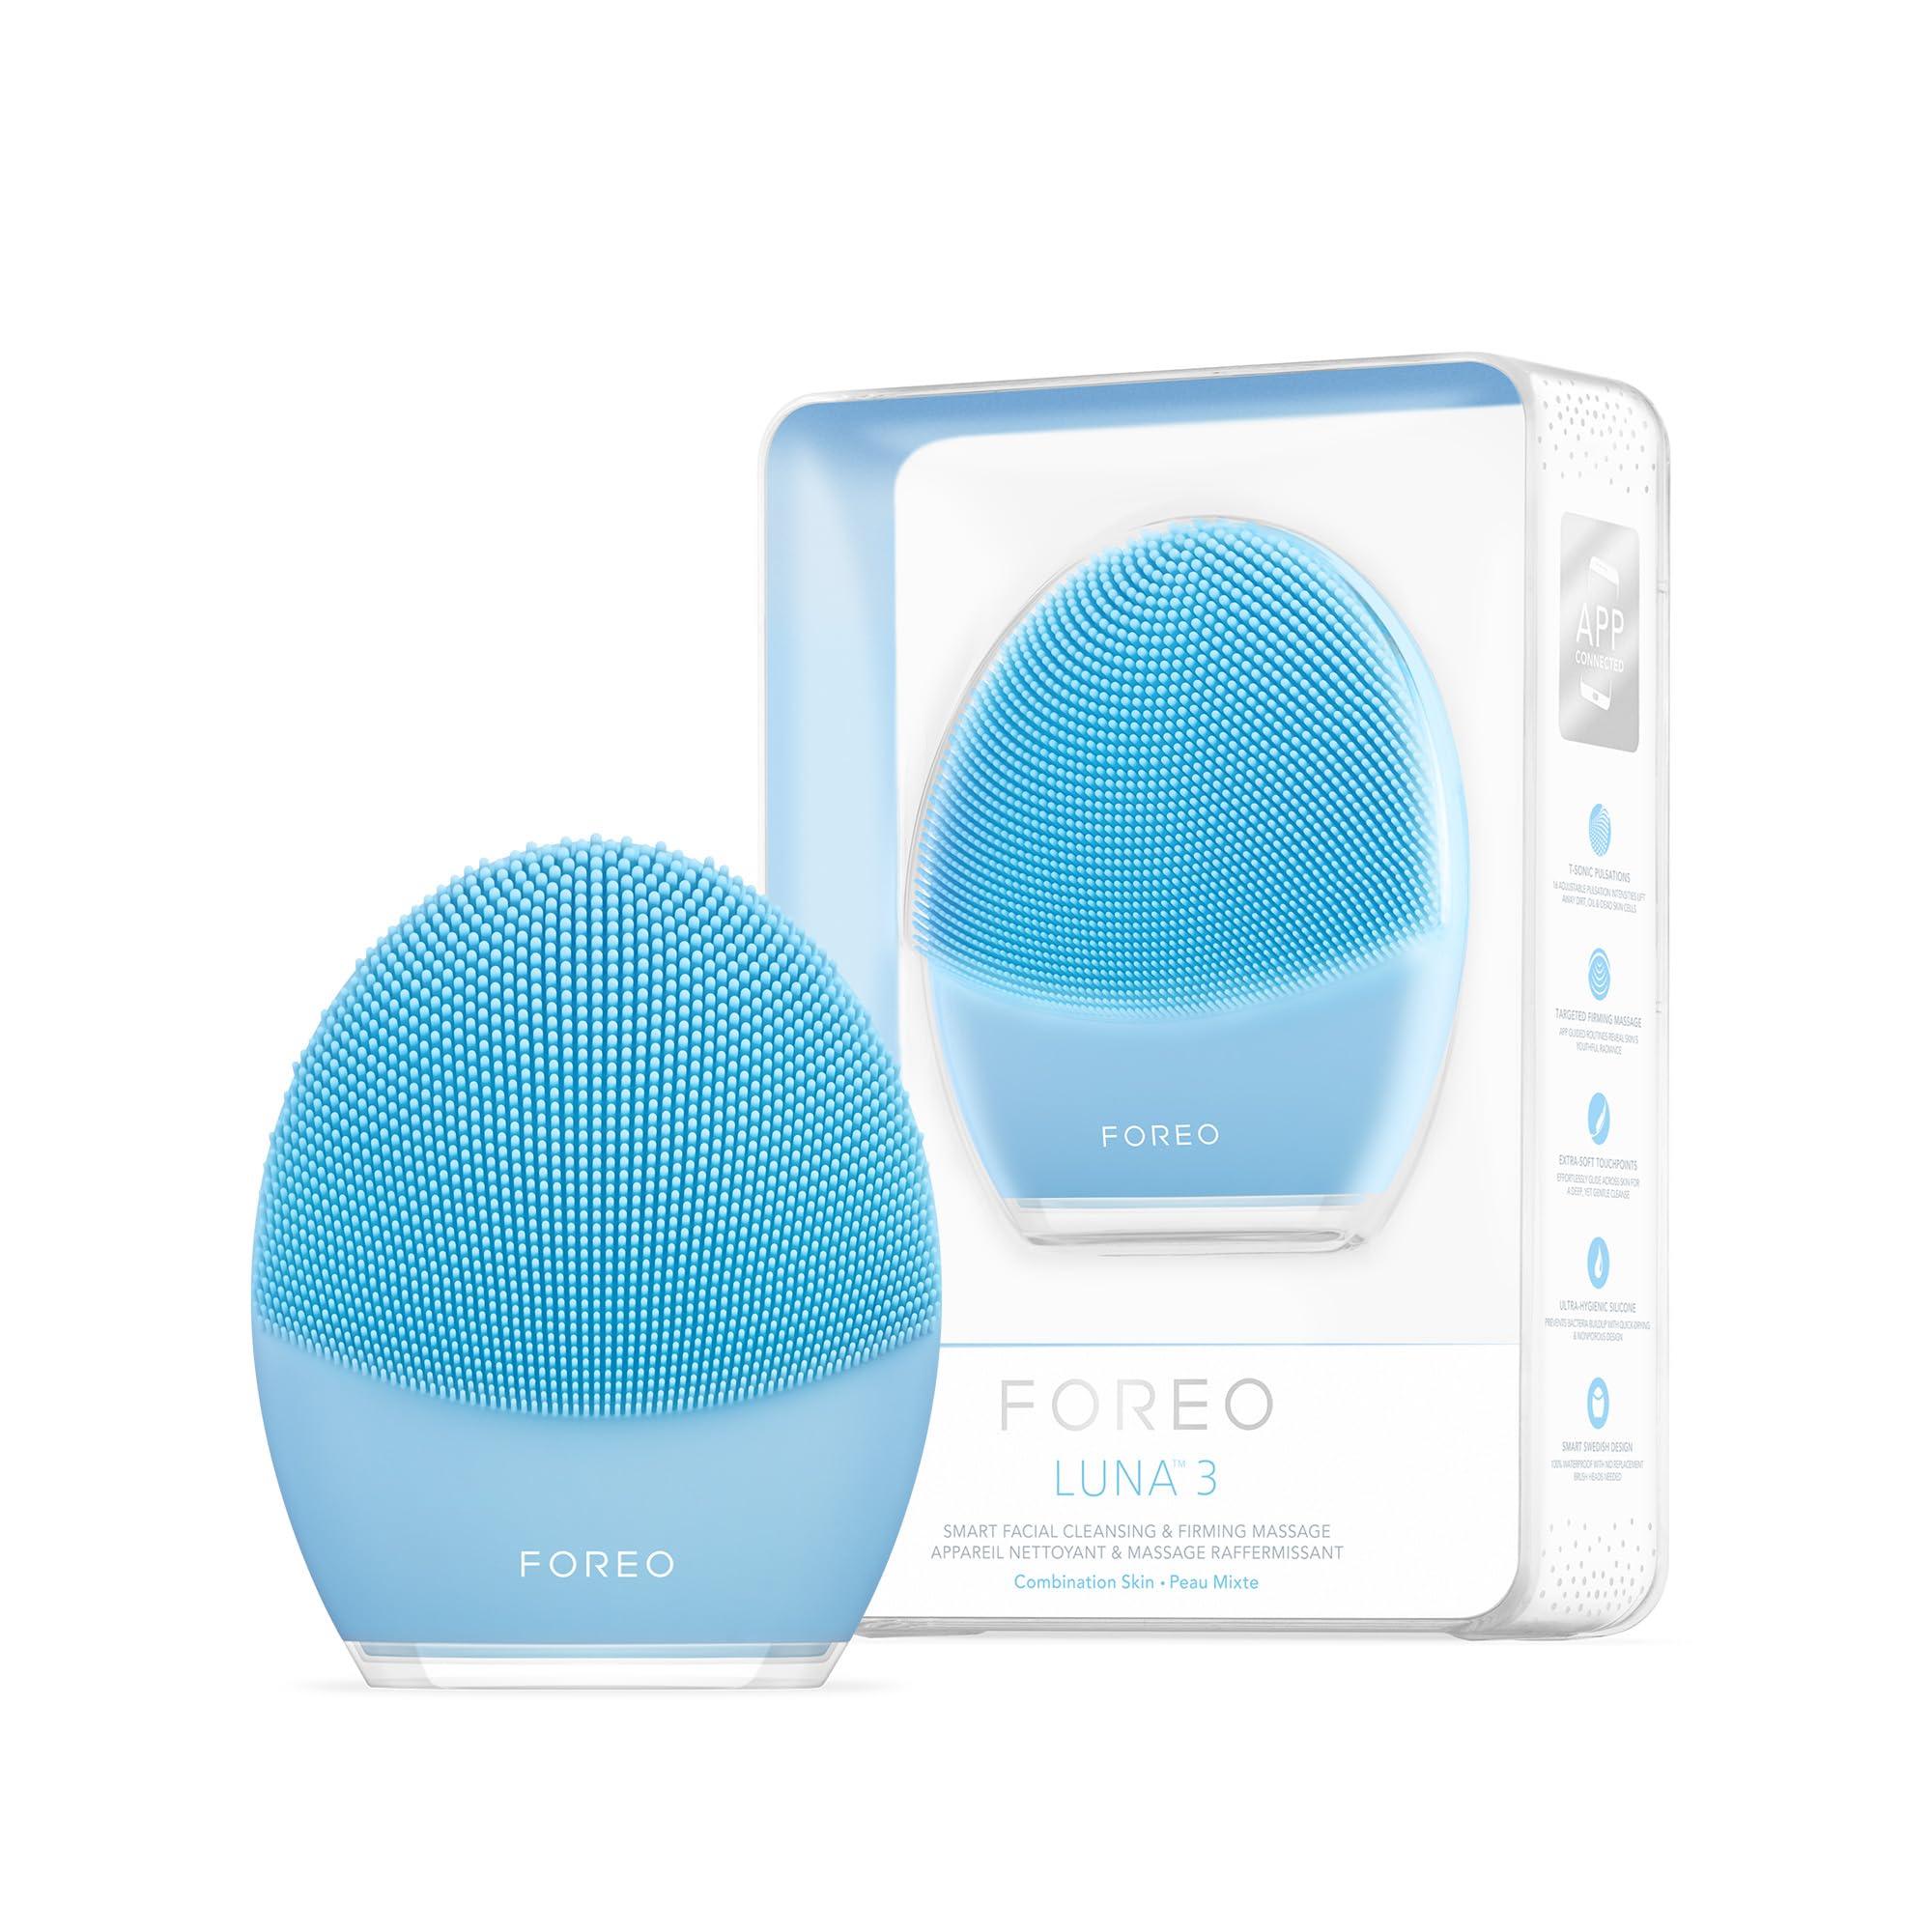 FOREO LUNA 3 Facial Cleansing Brush | Combination skin | Anti Aging Face Massager | Enhances Absorption of Facial Skin Care Products | For Clean & Healthy Face Care | Simple & Easy | Waterproof - The European Gift Store